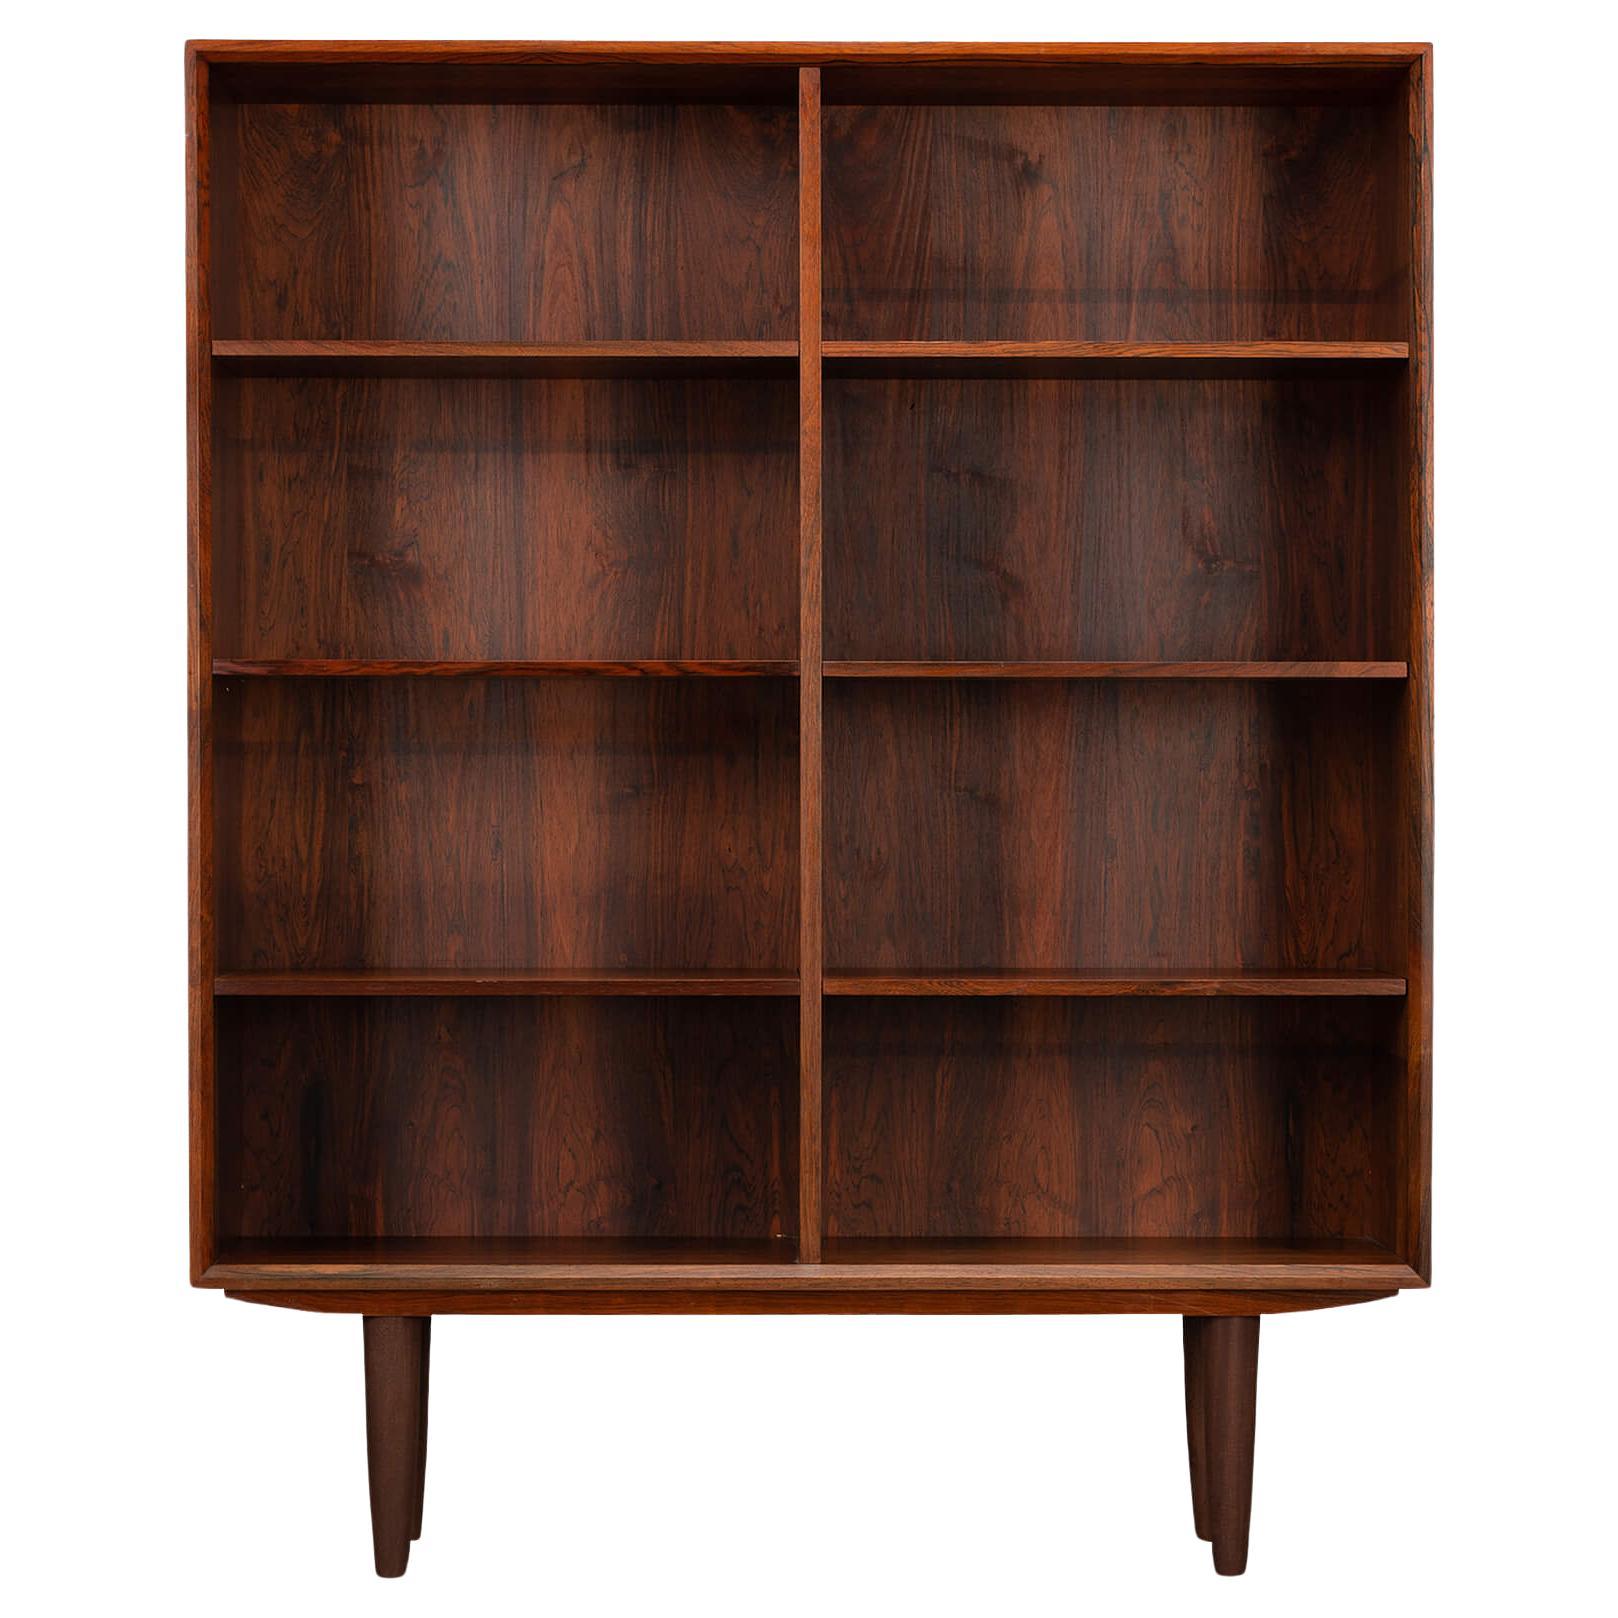 Danish Design Rosewood Bookcase made by Nexo, 1960s For Sale